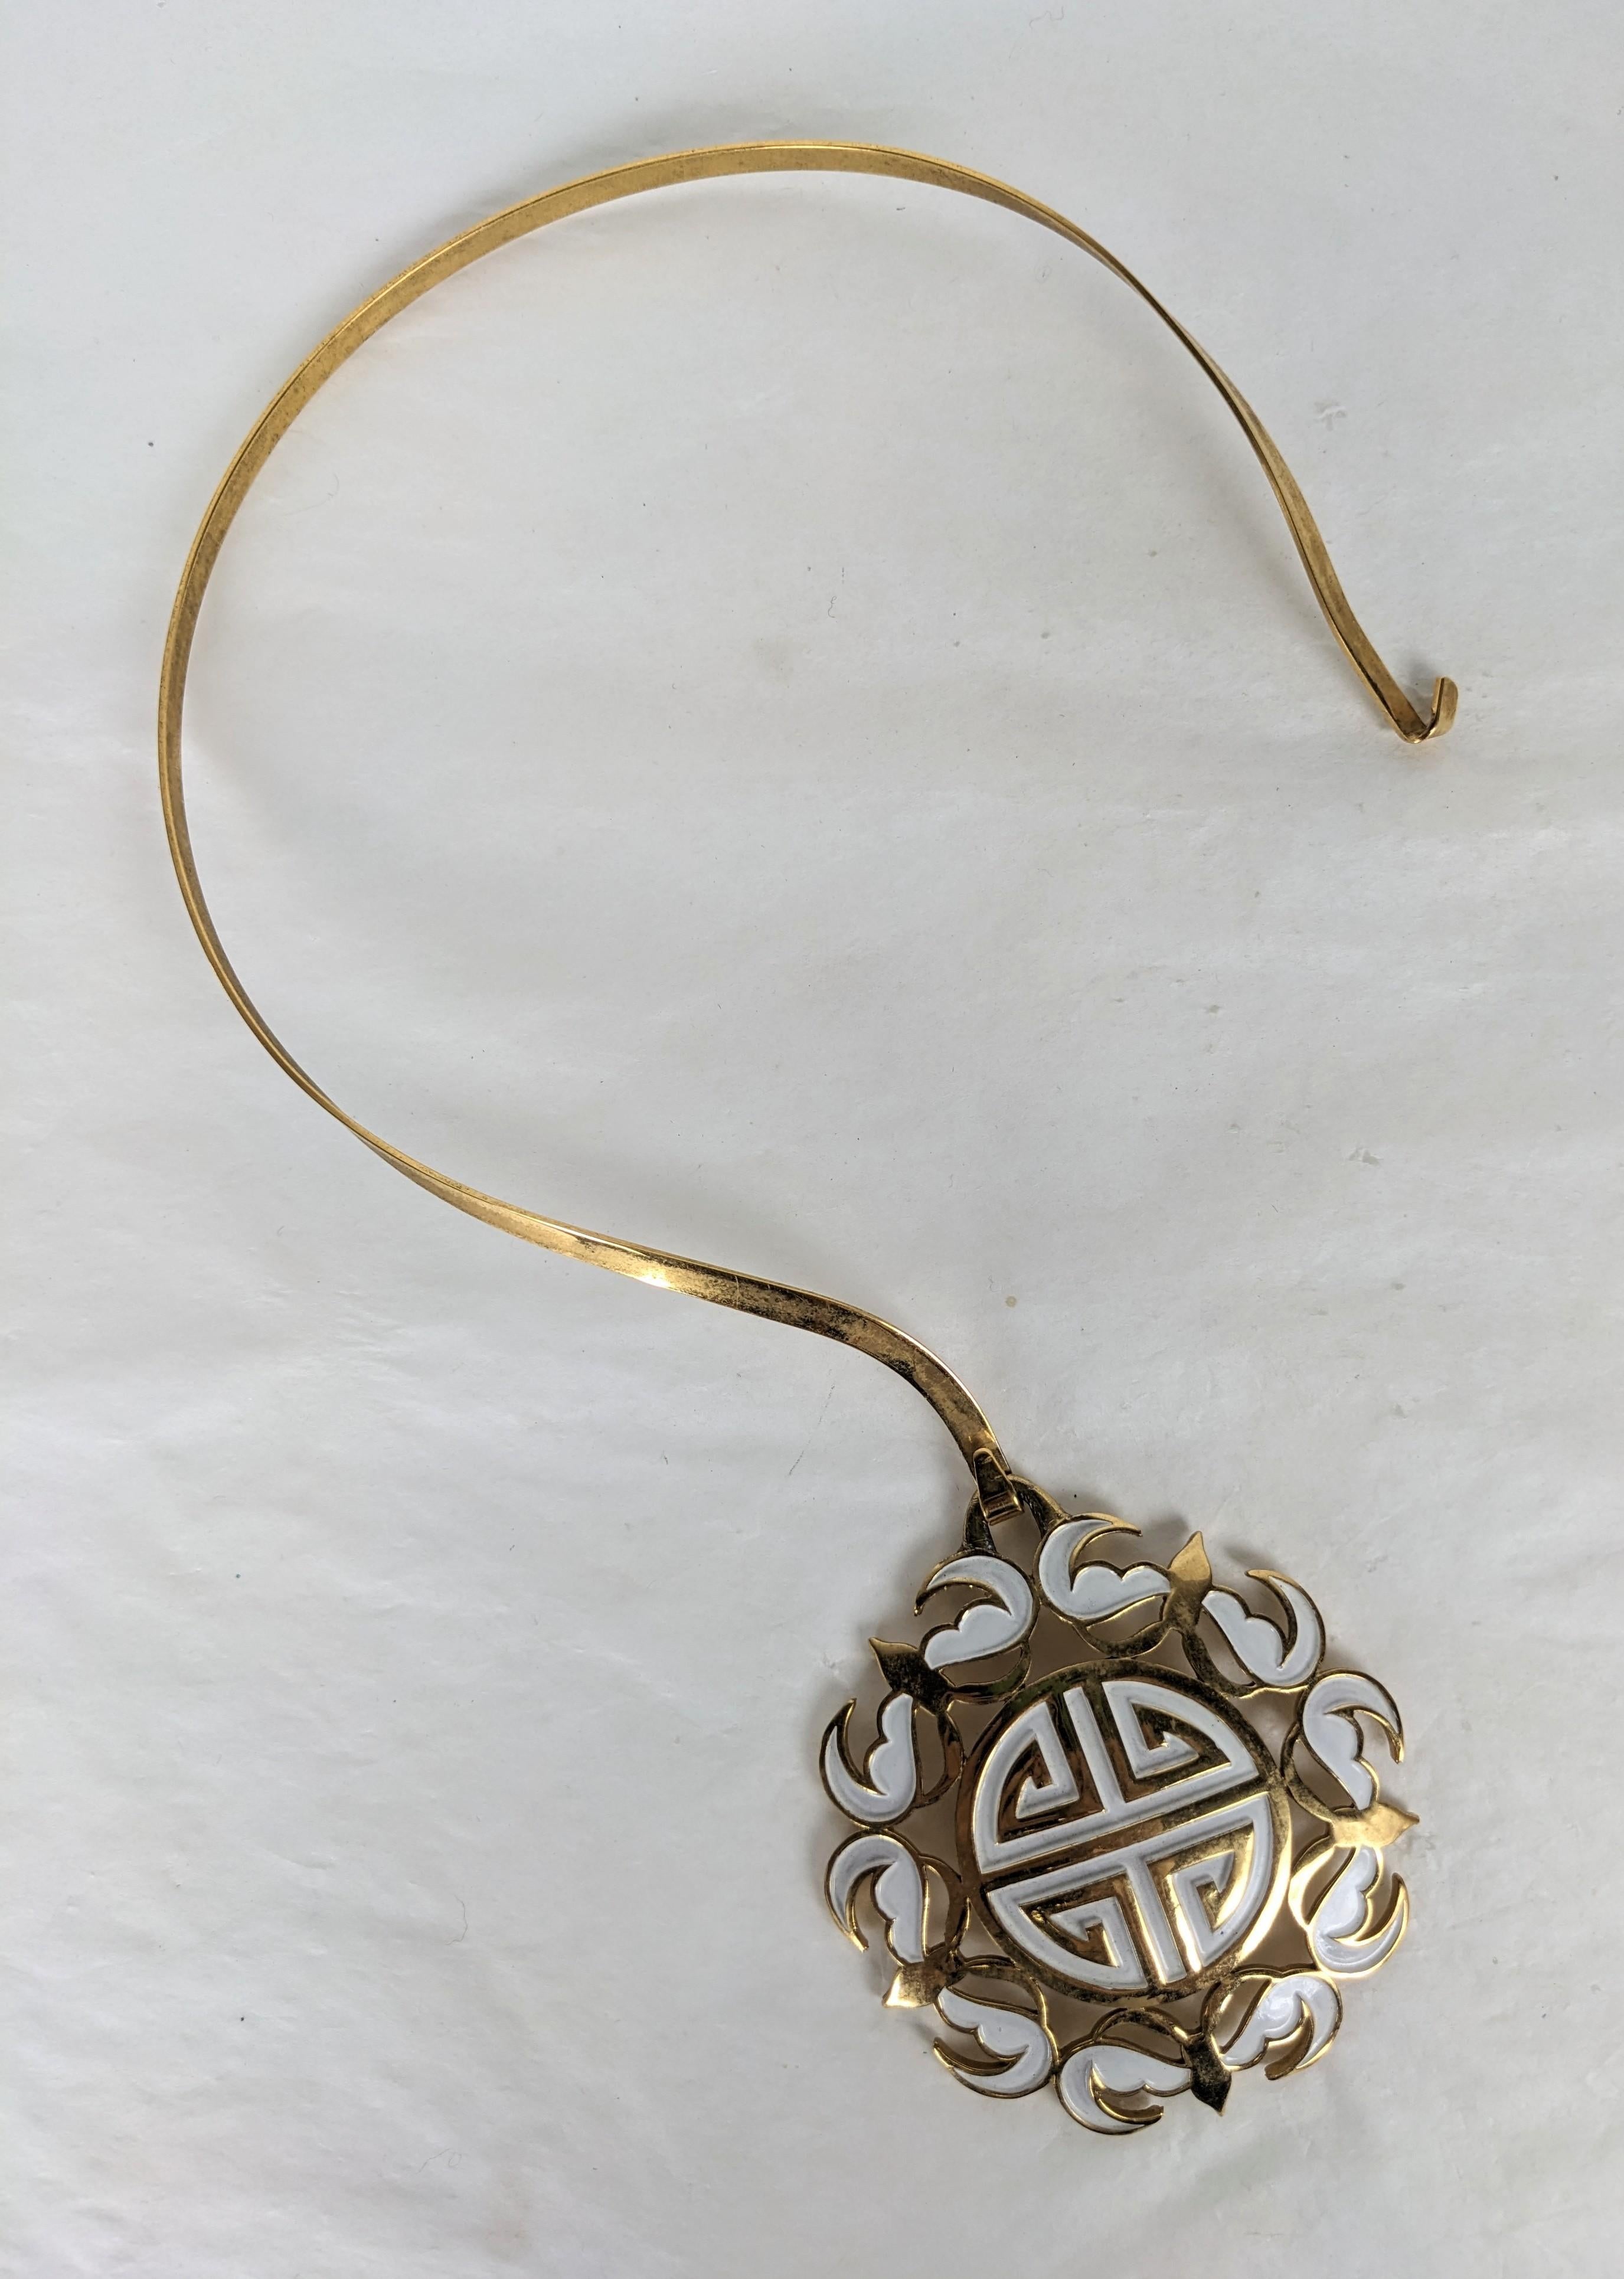 Trifari Chinese Symbol Mod Pendant  In Good Condition For Sale In New York, NY